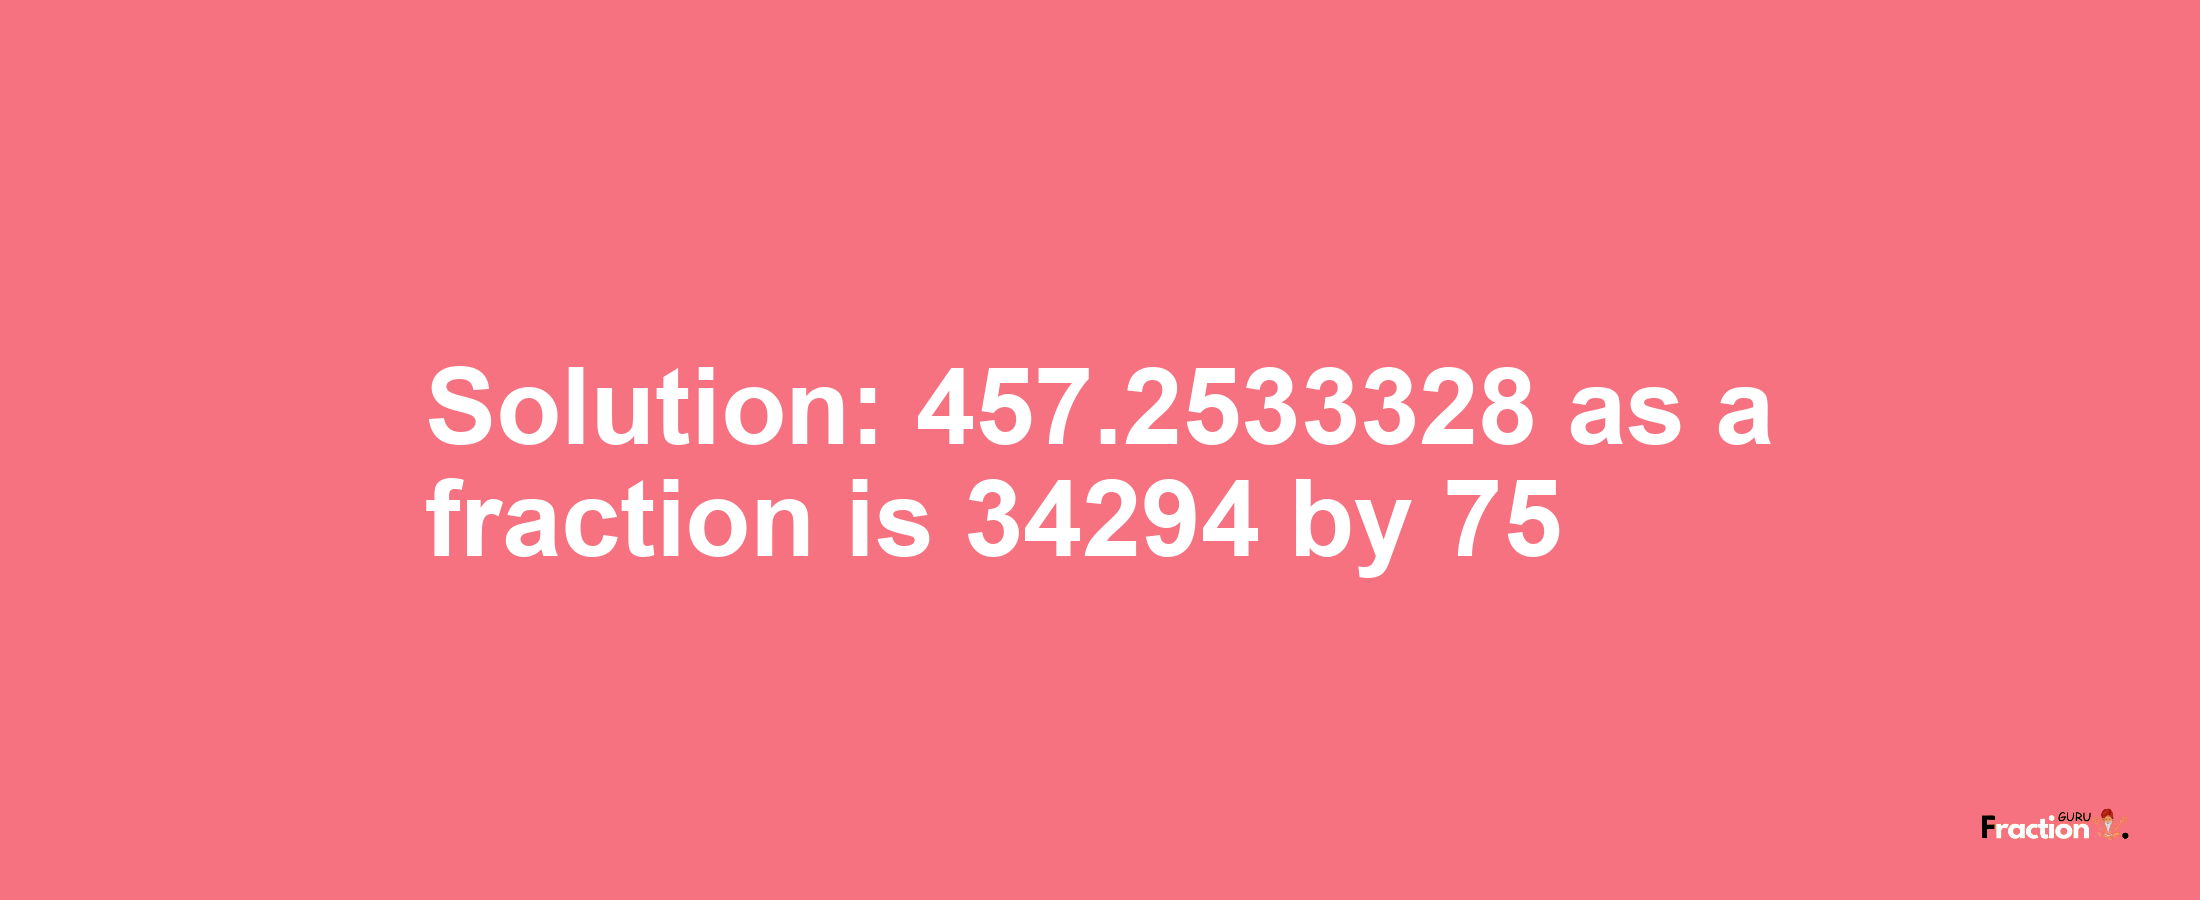 Solution:457.2533328 as a fraction is 34294/75